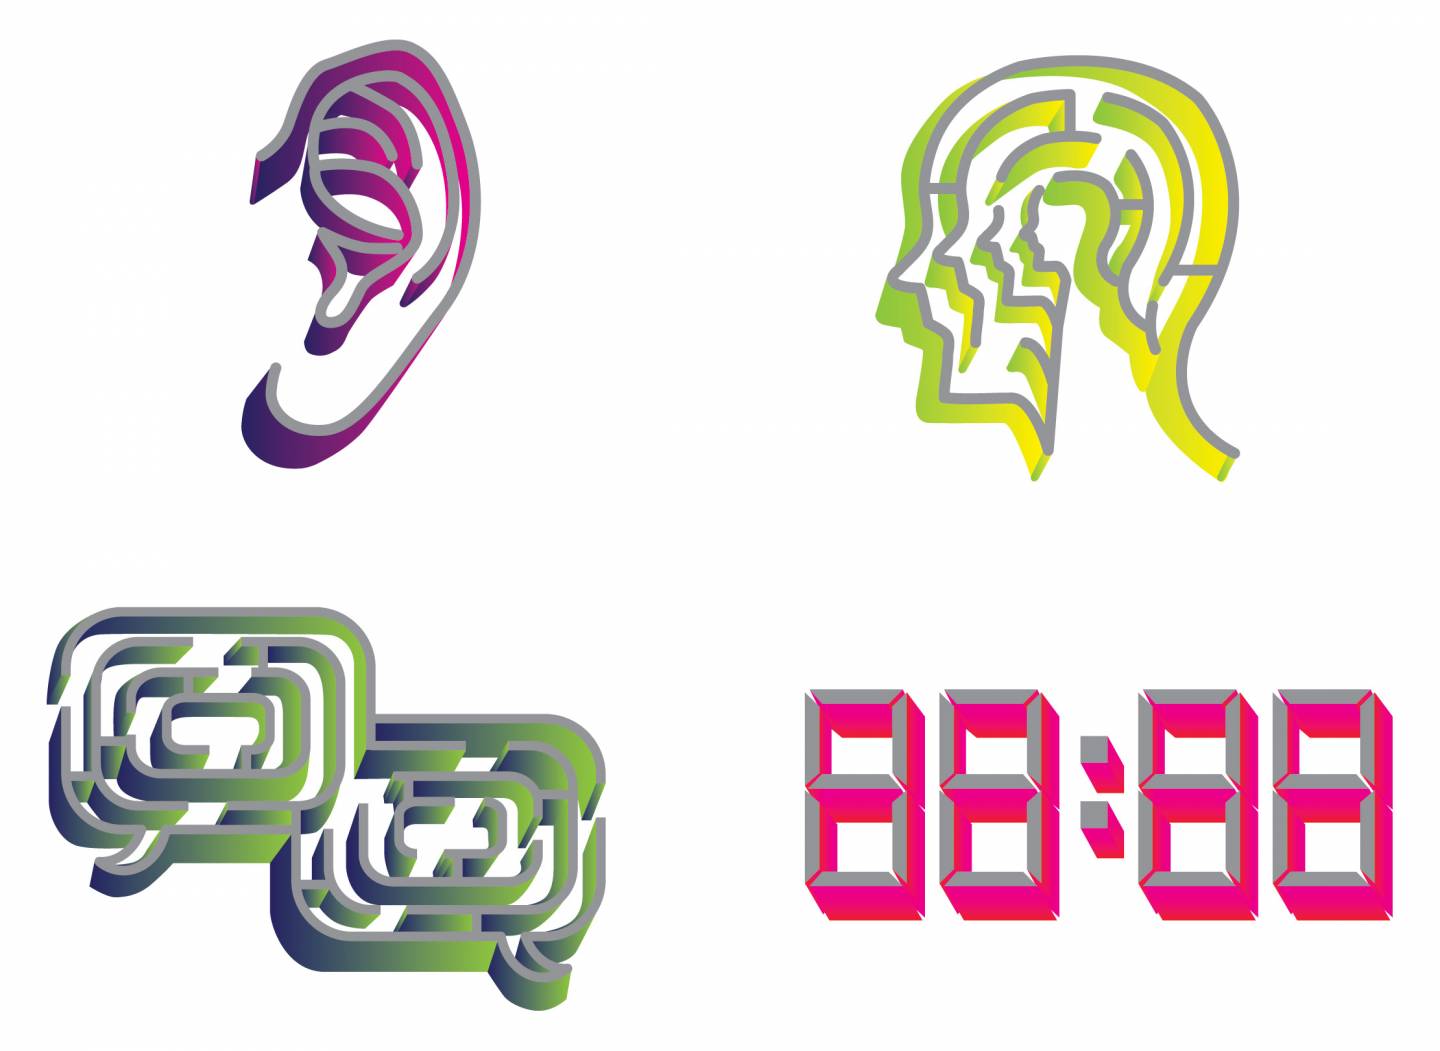 Maze-like icons of an ear, head, dialogue balloons, and clock